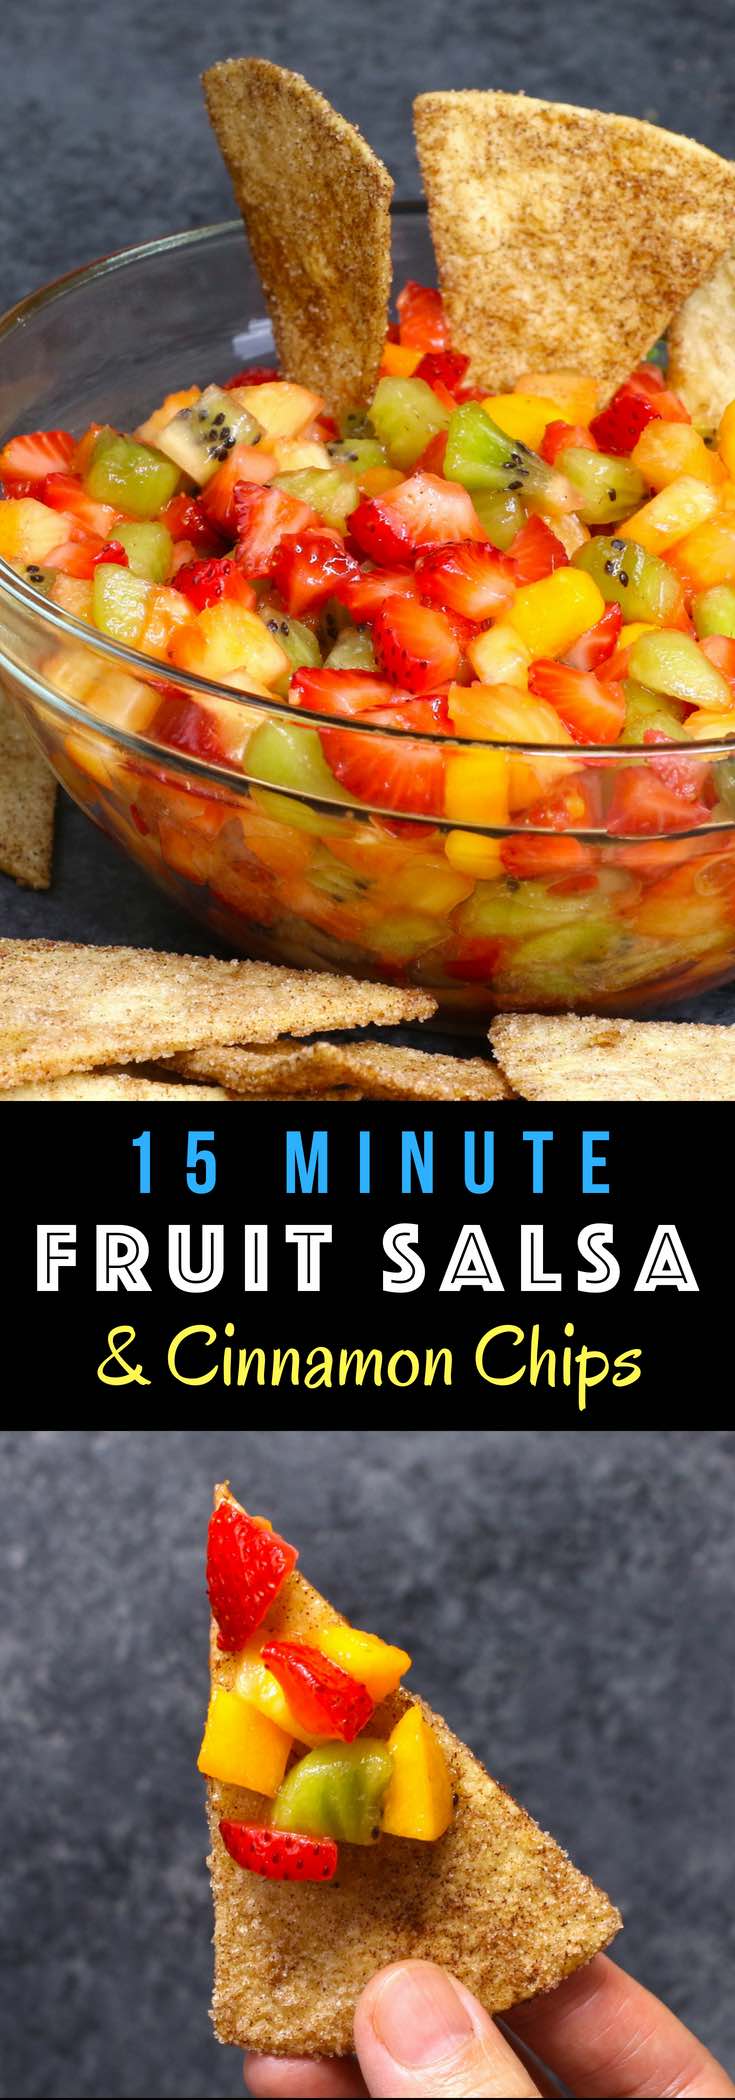 Quick and easy Fruit Salsa with Cinnamon Chips – delicious fruit salsa with crispy and sweet cinnamon chips. It comes together in no time. It’s a great way to start the day, enjoy the day, or finish the day with this fresh Fruit Salsa! #fruitSalsa